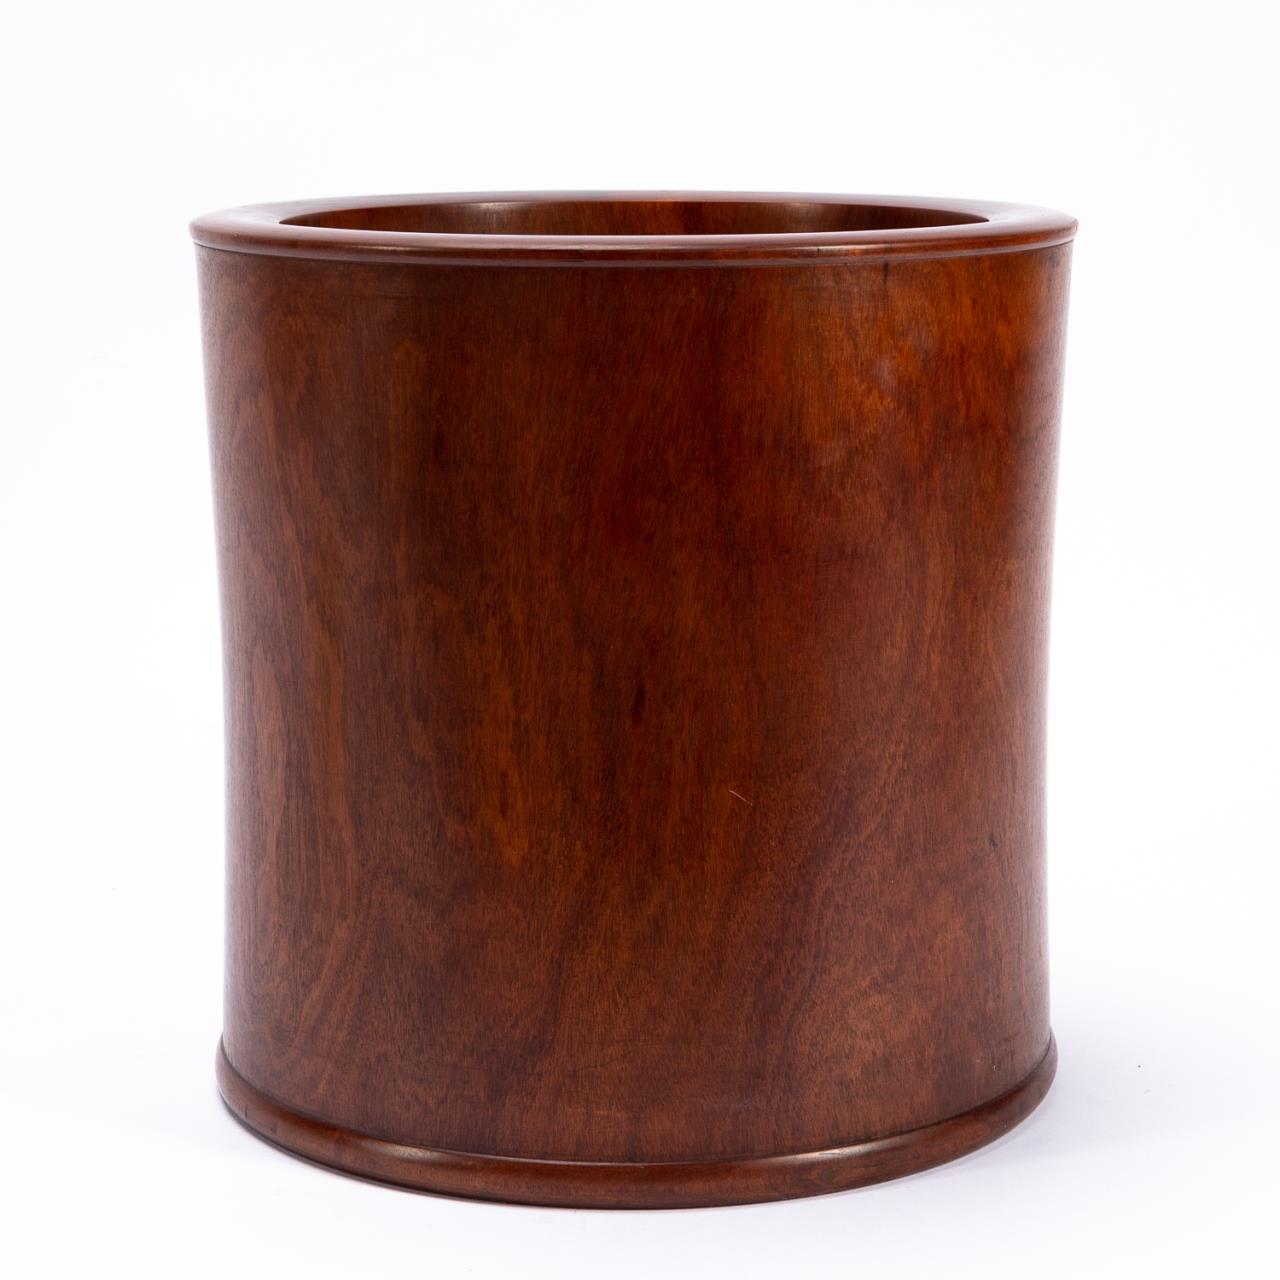 LARGE CHINESE ROSEWOOD BRUSH POT 35aa6a